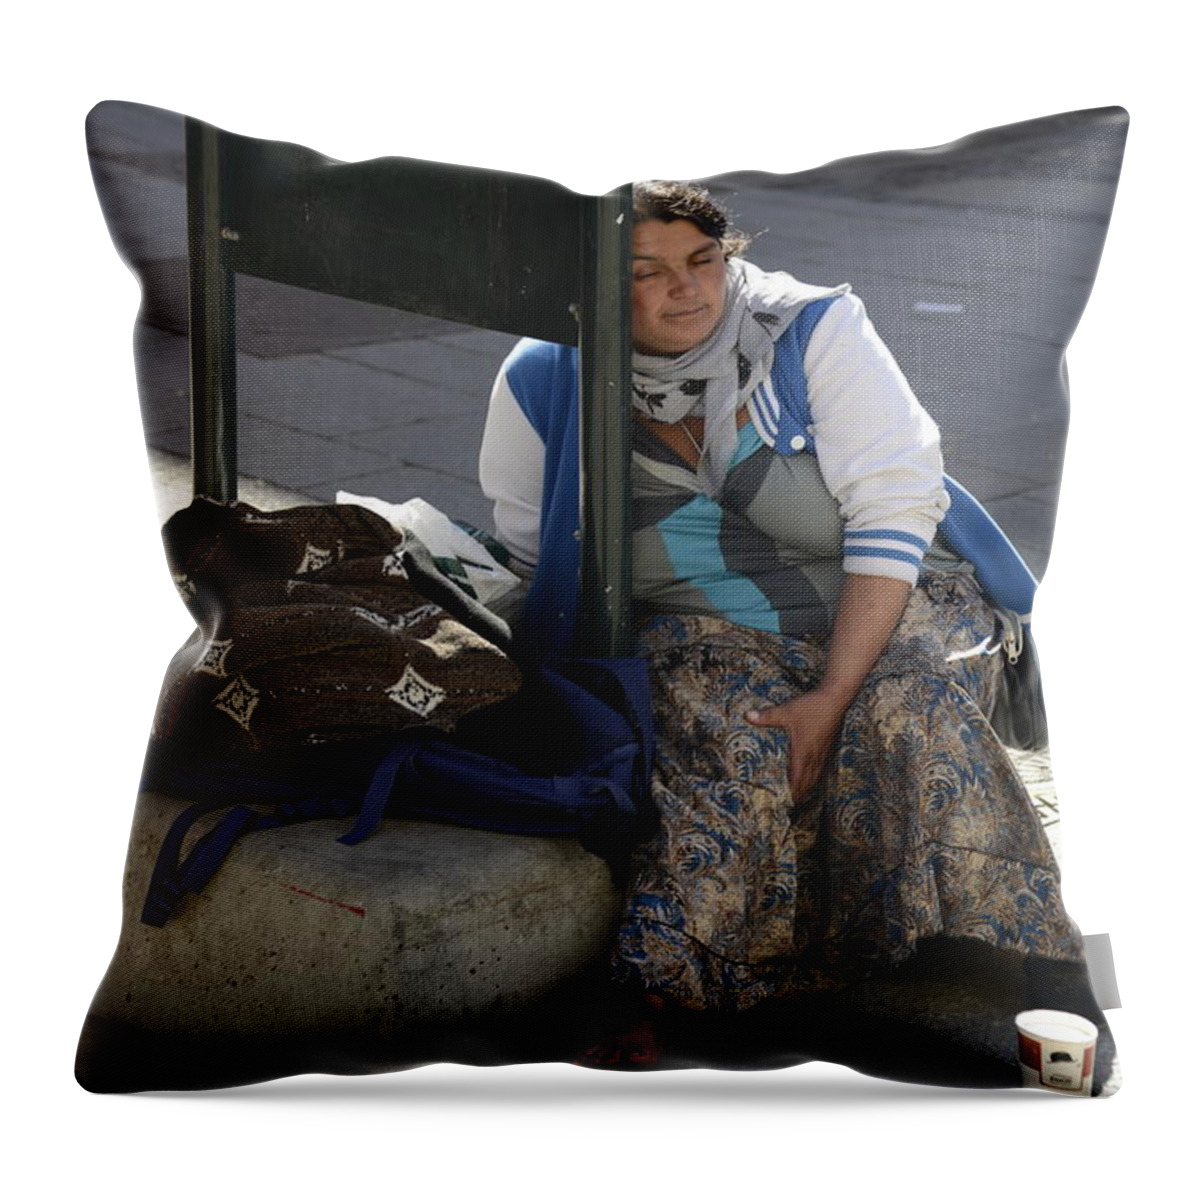 Andre Theophane ( Teo ) Sitchet-kanda Portrait And Fine Art Photography Throw Pillow featuring the photograph Street People - A Touch Of Humanity 10 by Teo SITCHET-KANDA